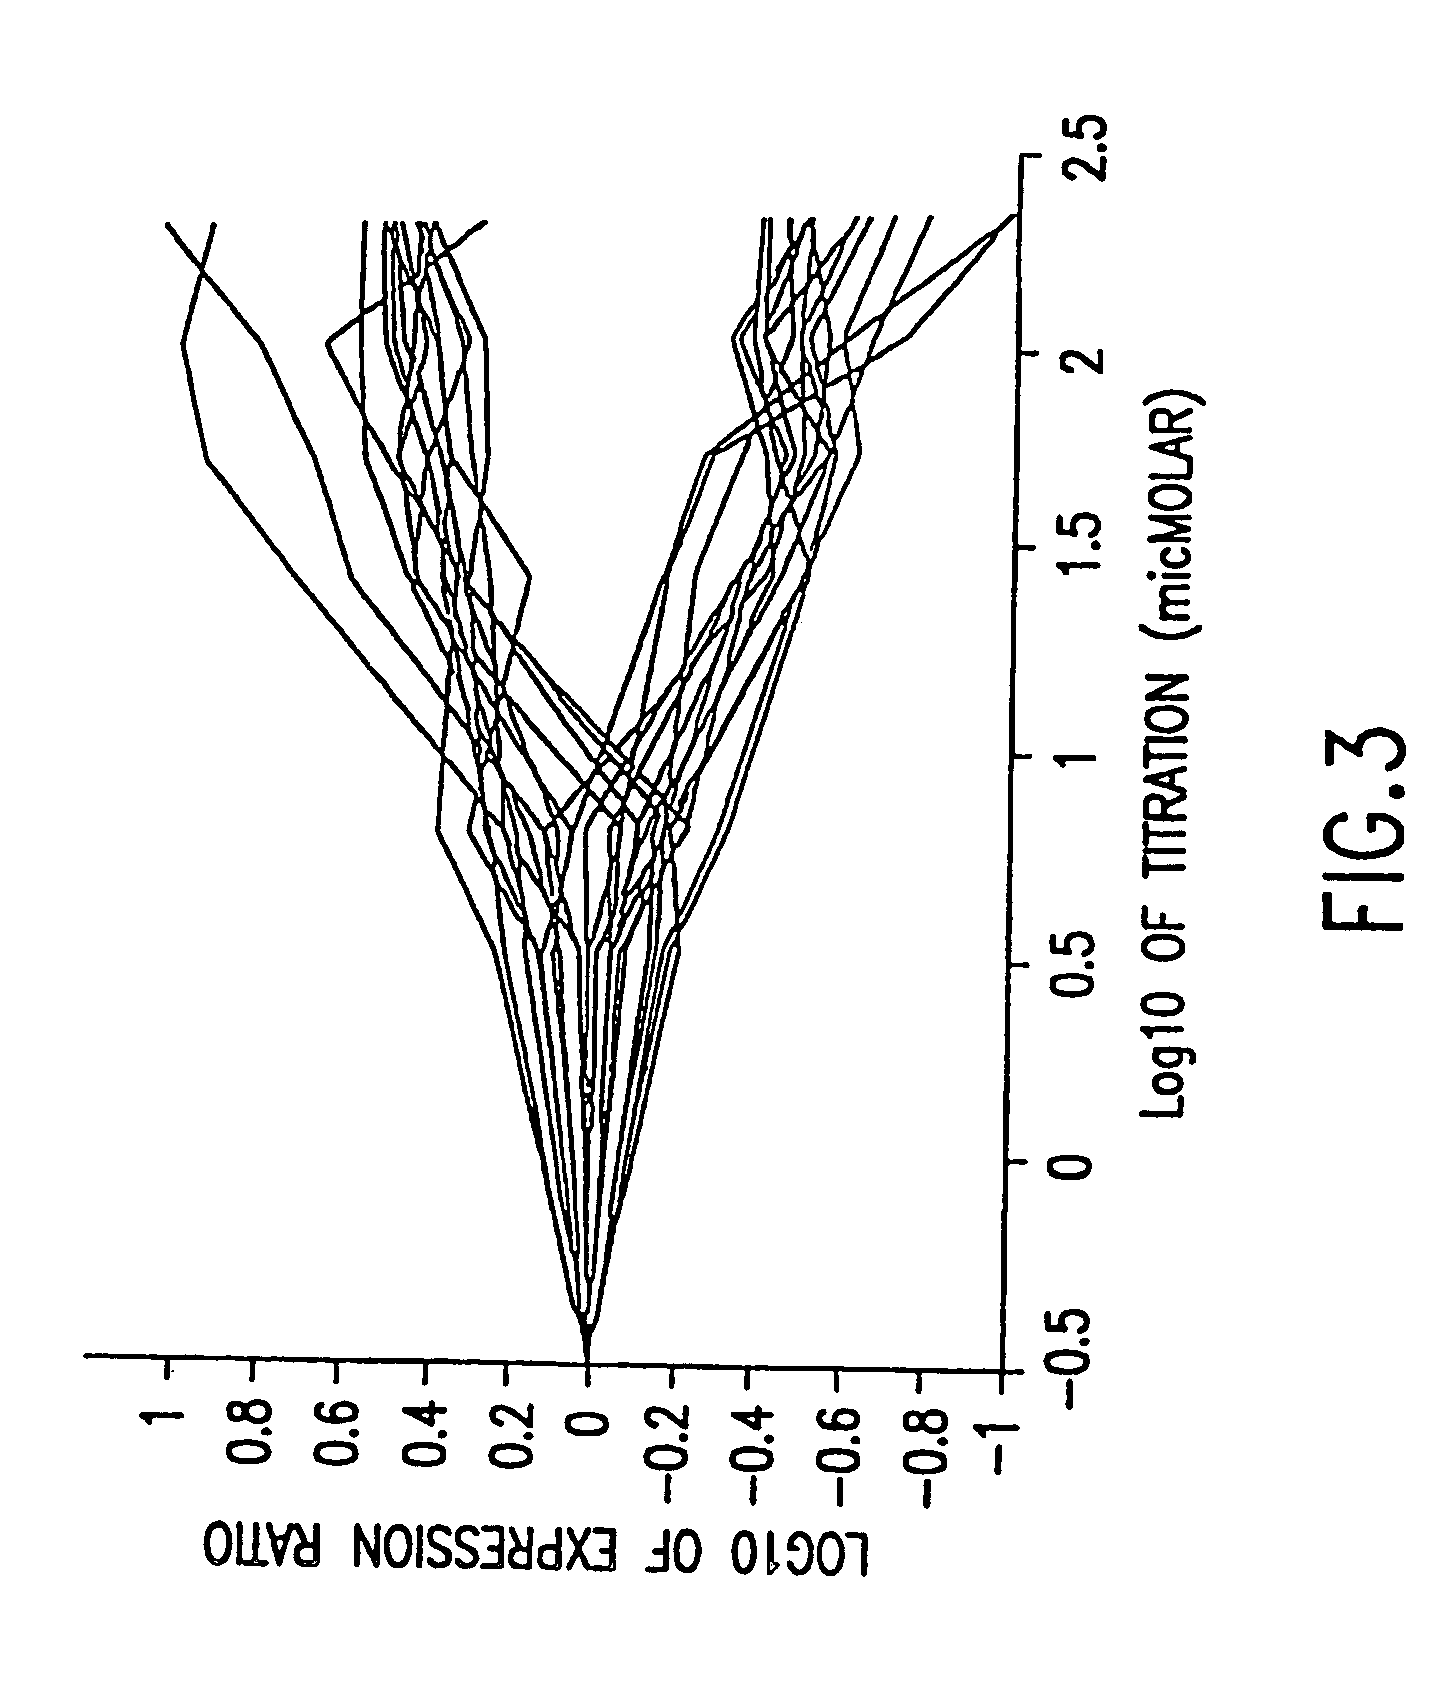 Methods for determining therapeutic index from gene expression profiles